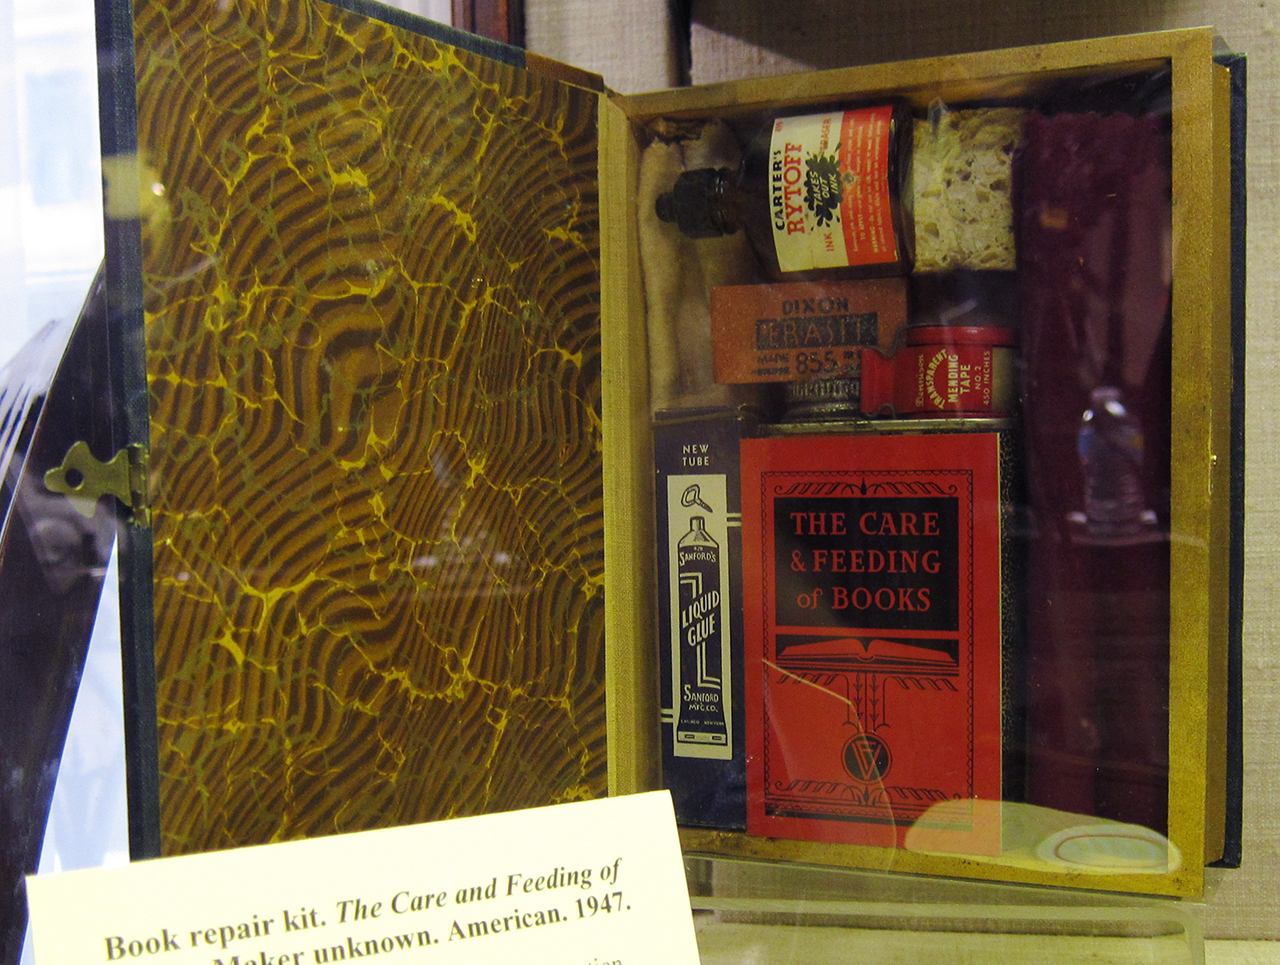 "The Care and Feeding of Books" (1947), a book repair kit